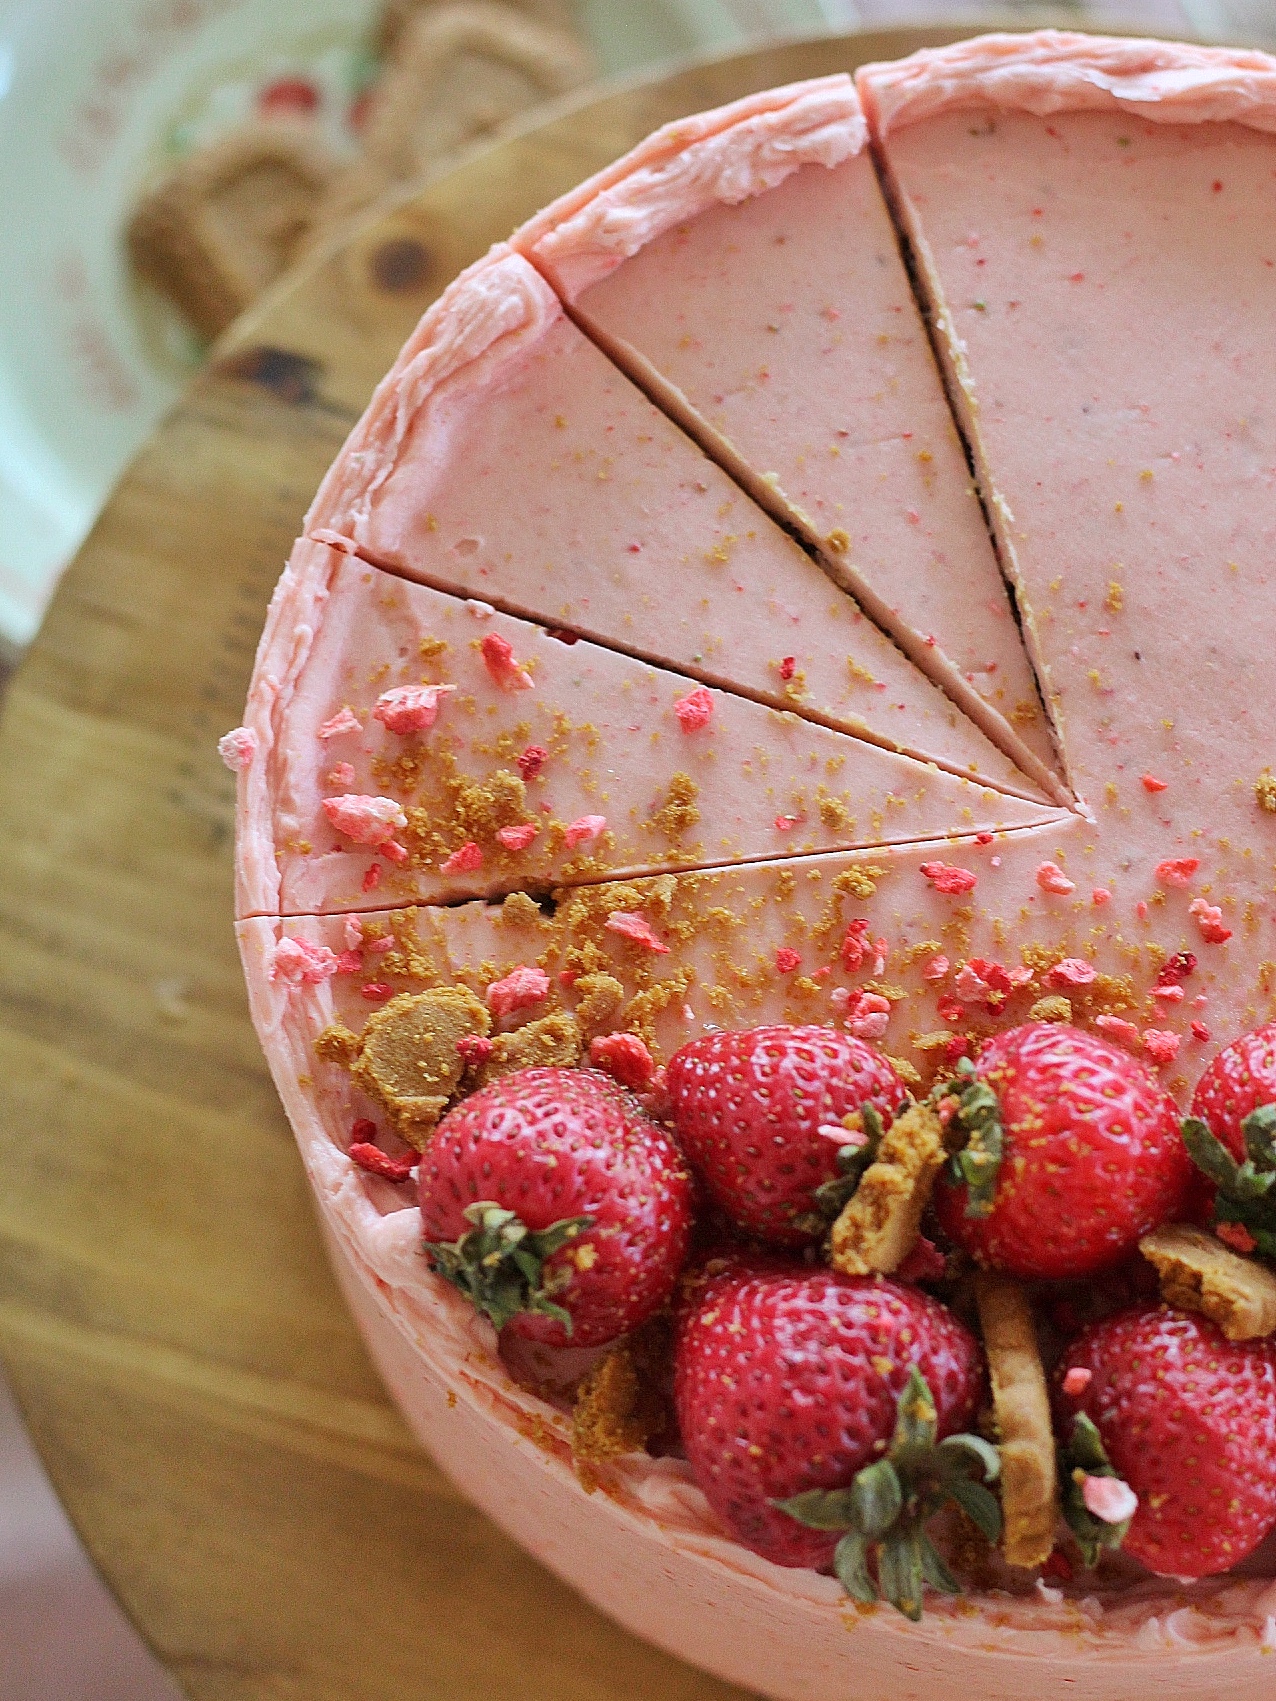 Biscoff Strawberry Cake - Biscoff cake layers, Biscoff filling and cookies and strawberry buttercream. #cake #biscoff #biscoffcake #strawberrybuttercream #biscoffstrawberrycake #strawberrybiscoffcake